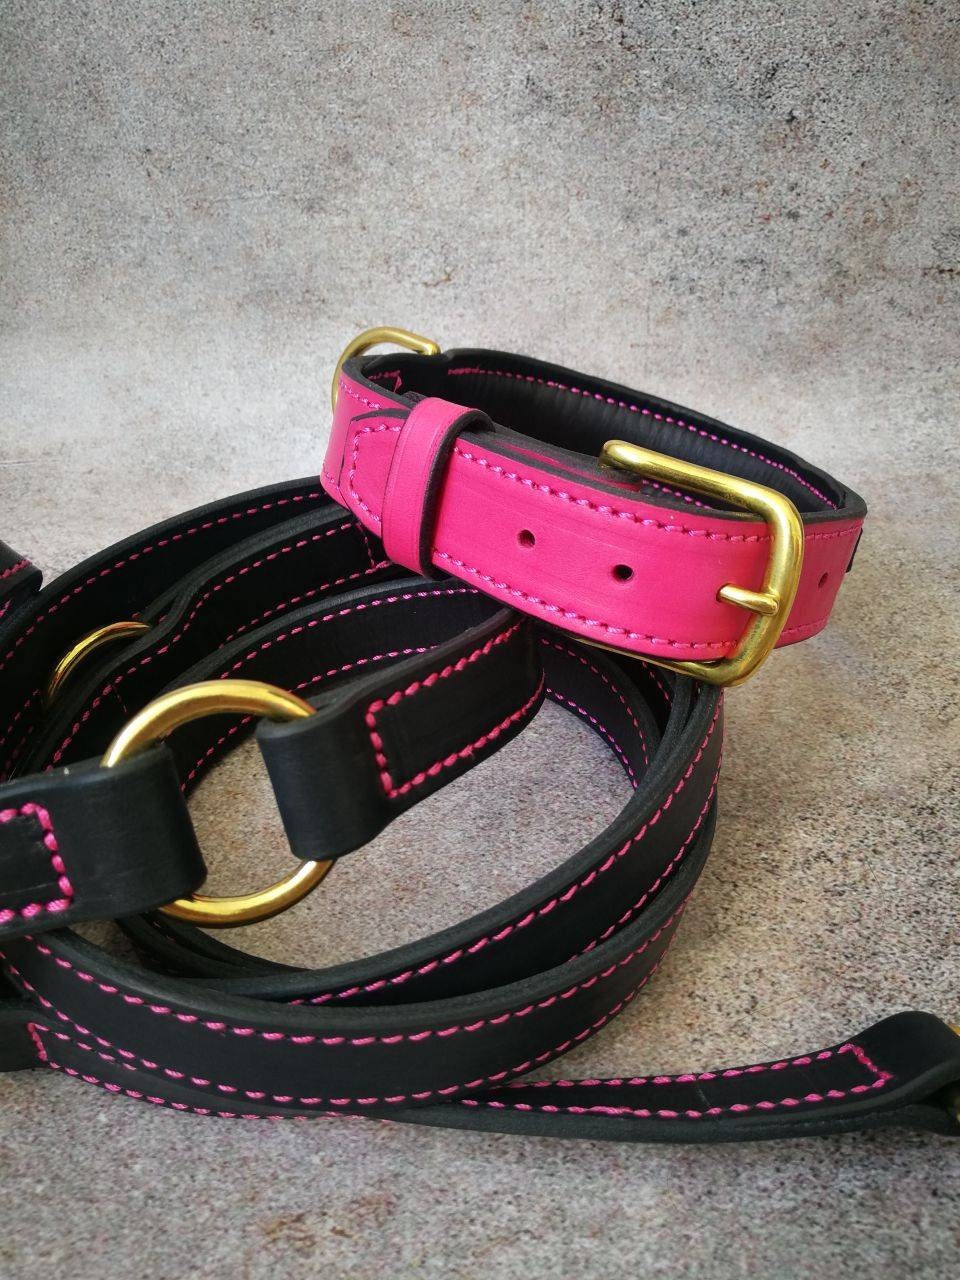 Pink and Black Leather Dog Matching Collar and Leash Set with Solid Brass Hardware, Strong Leather Brass Dog Collar stitched with pink